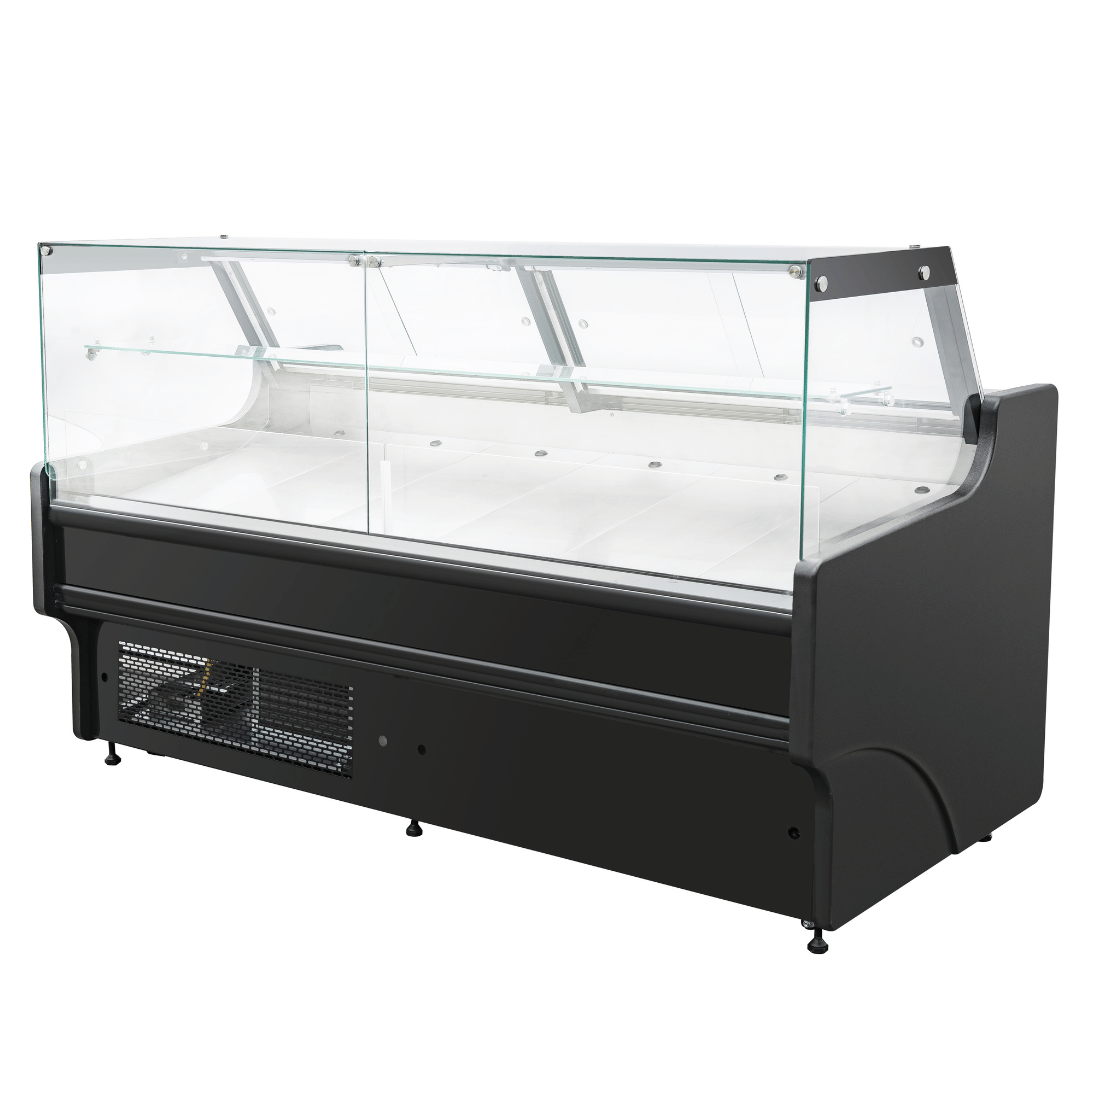 Thermaster Compact Deli Display ST20LK